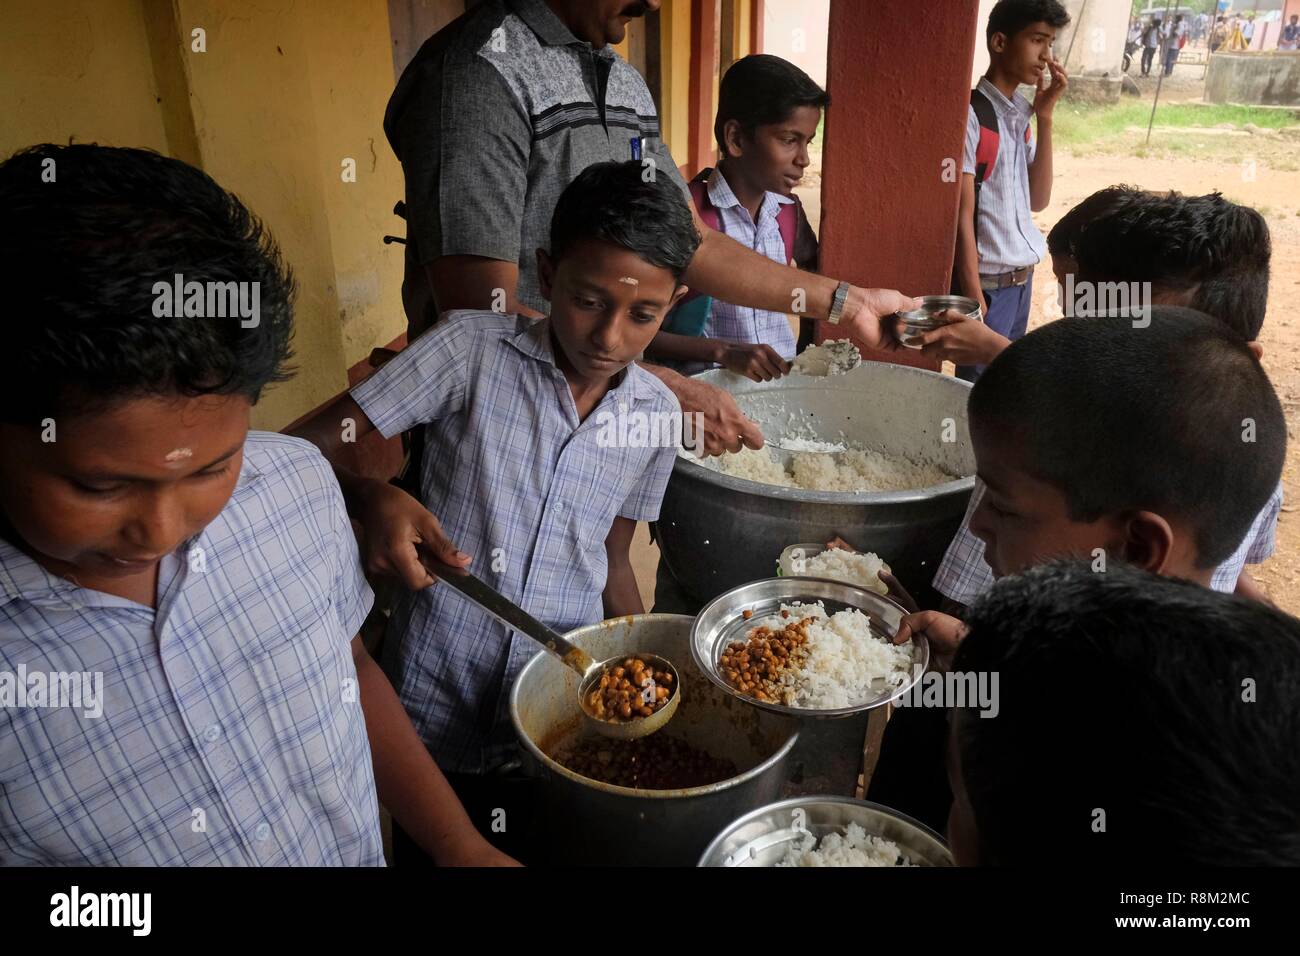 India Lunch School Stock Photos & India Lunch School Stock Images - Alamy